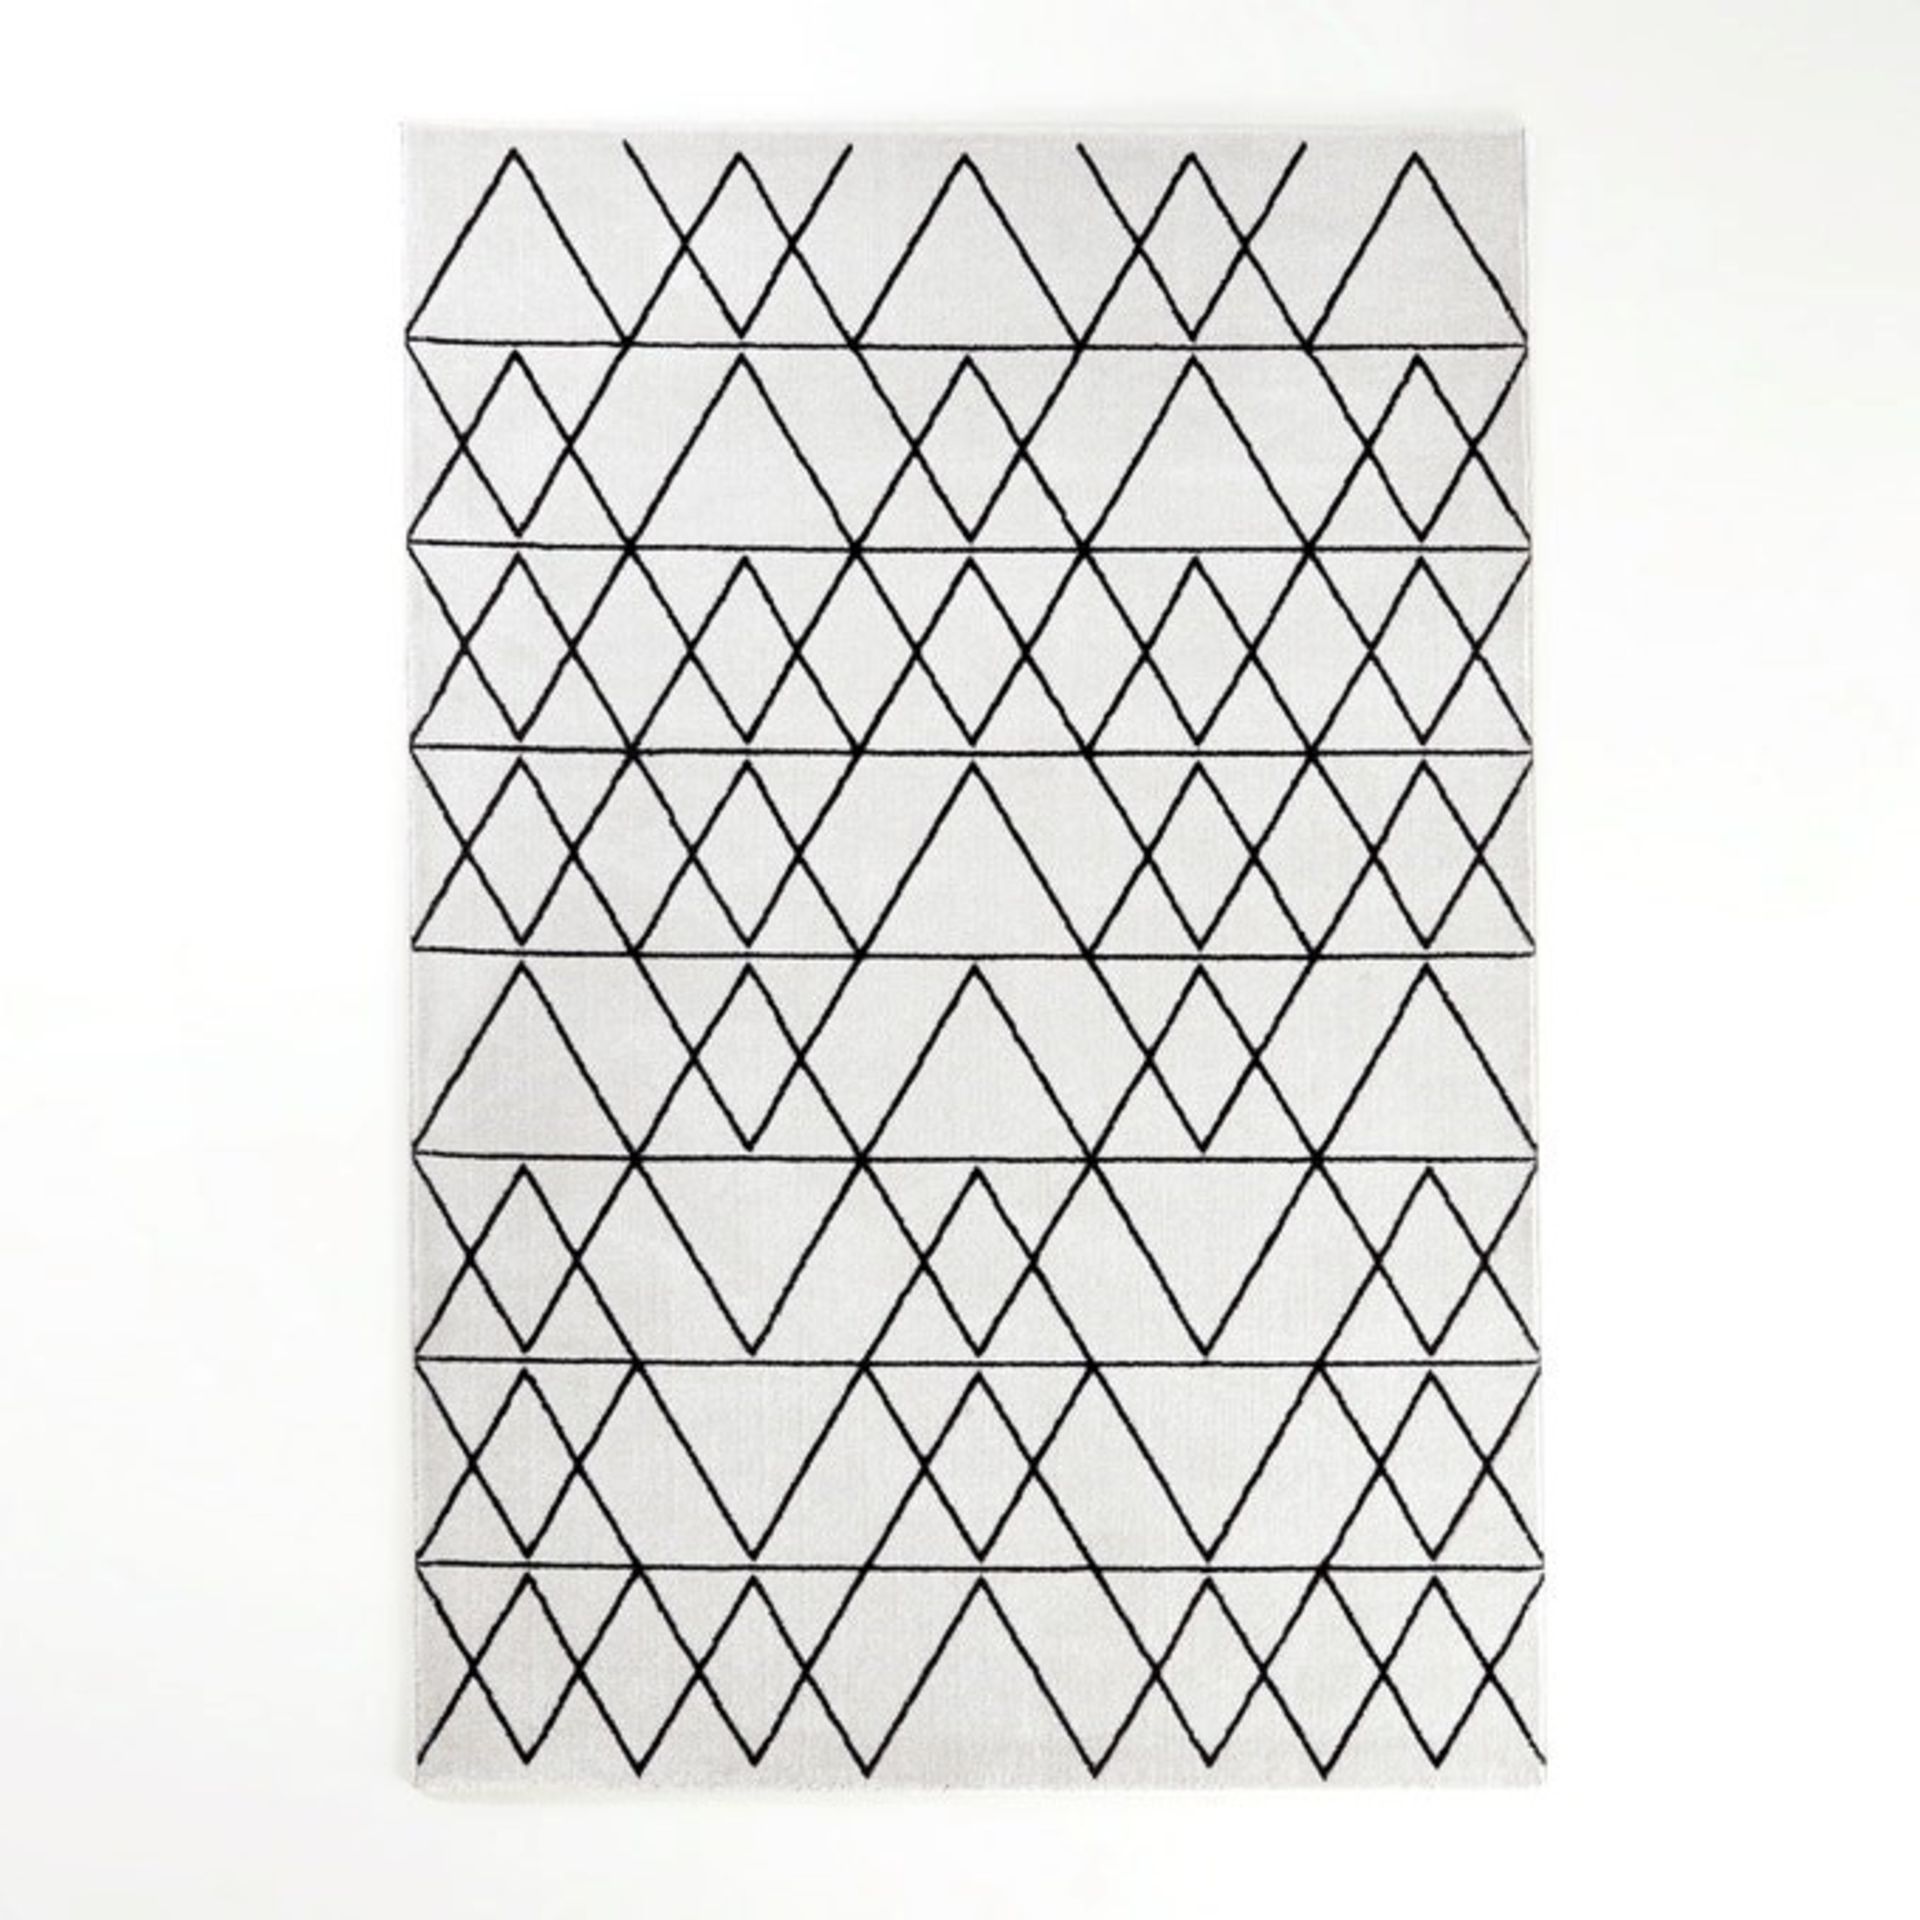 1 GRADE A BAGGED DESIGNER BLACK AND WHITE FEDRO RUG / 200 X 290CM / RRP £159.00 (PUBLIC VIEWING - Image 2 of 2